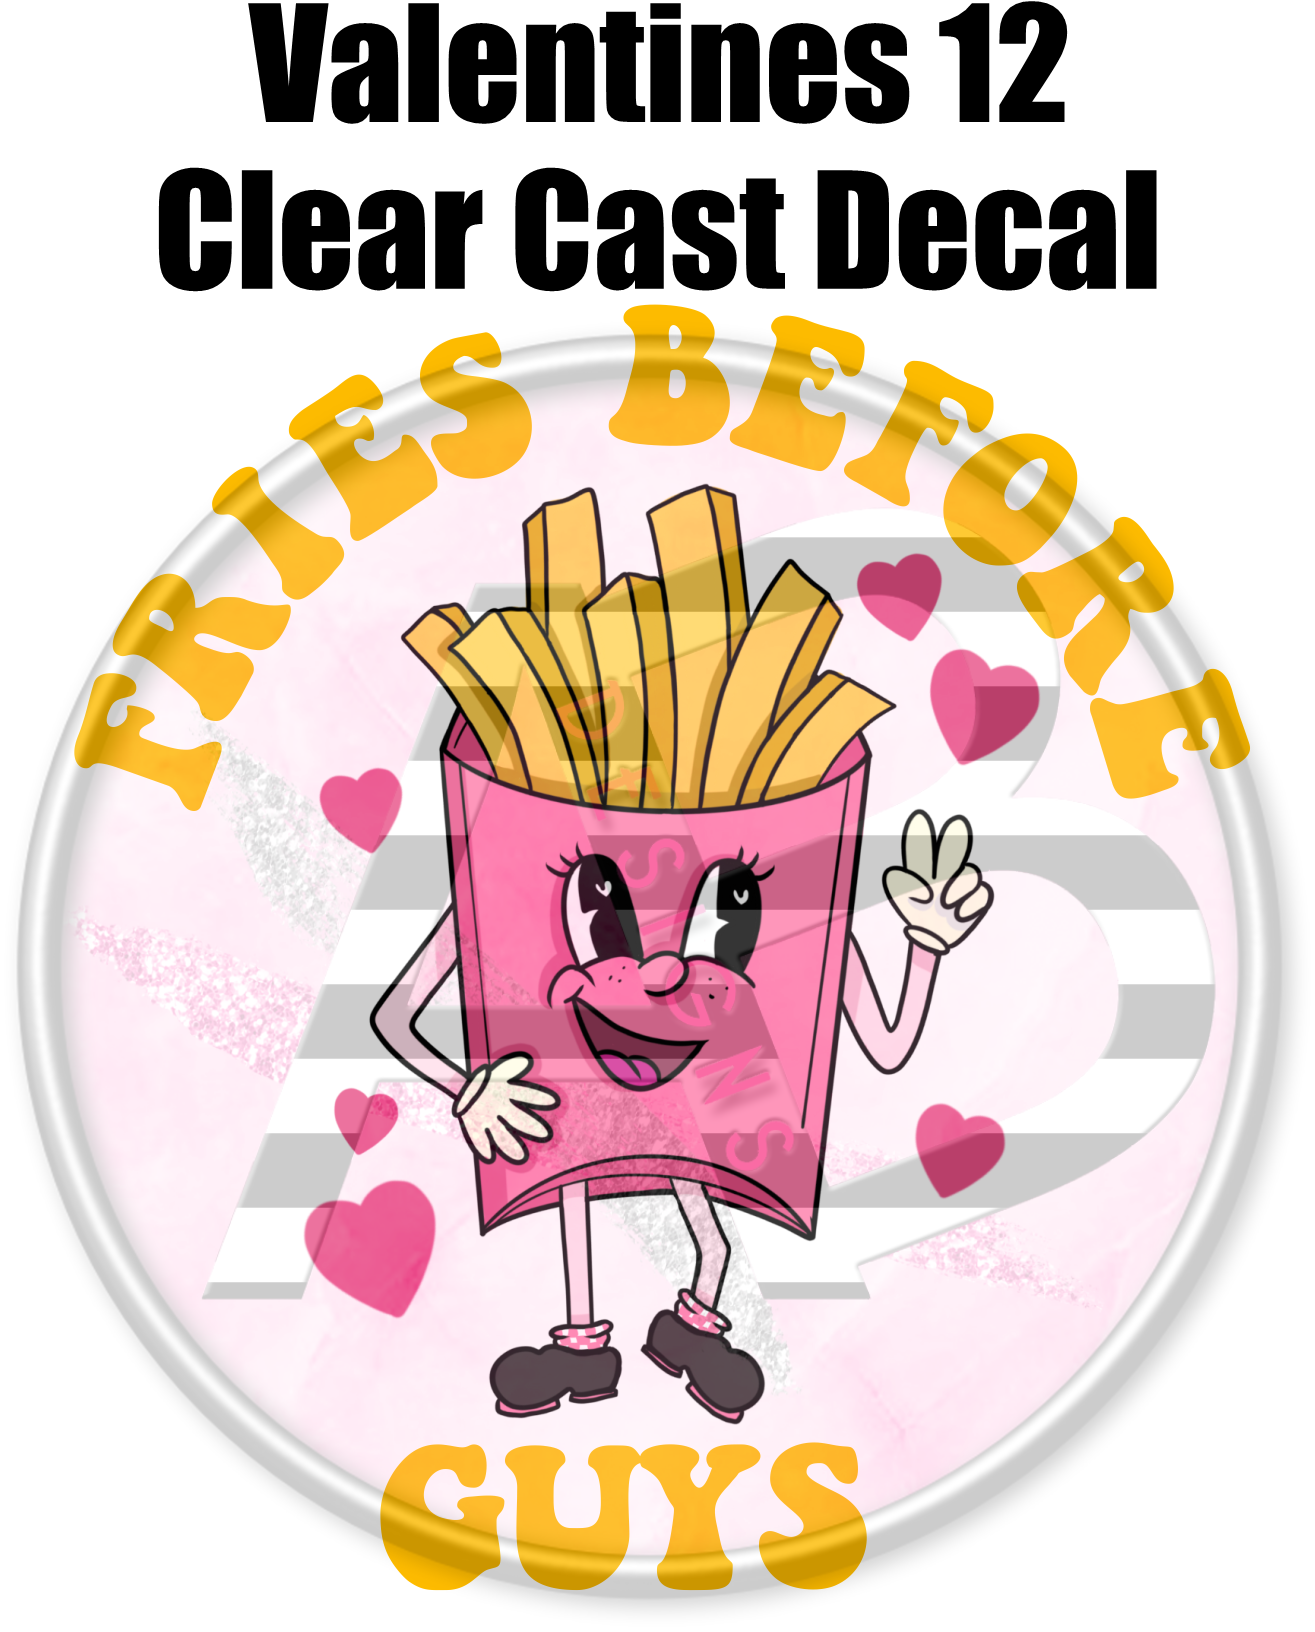 Valentines 12 - Clear Cast Decal